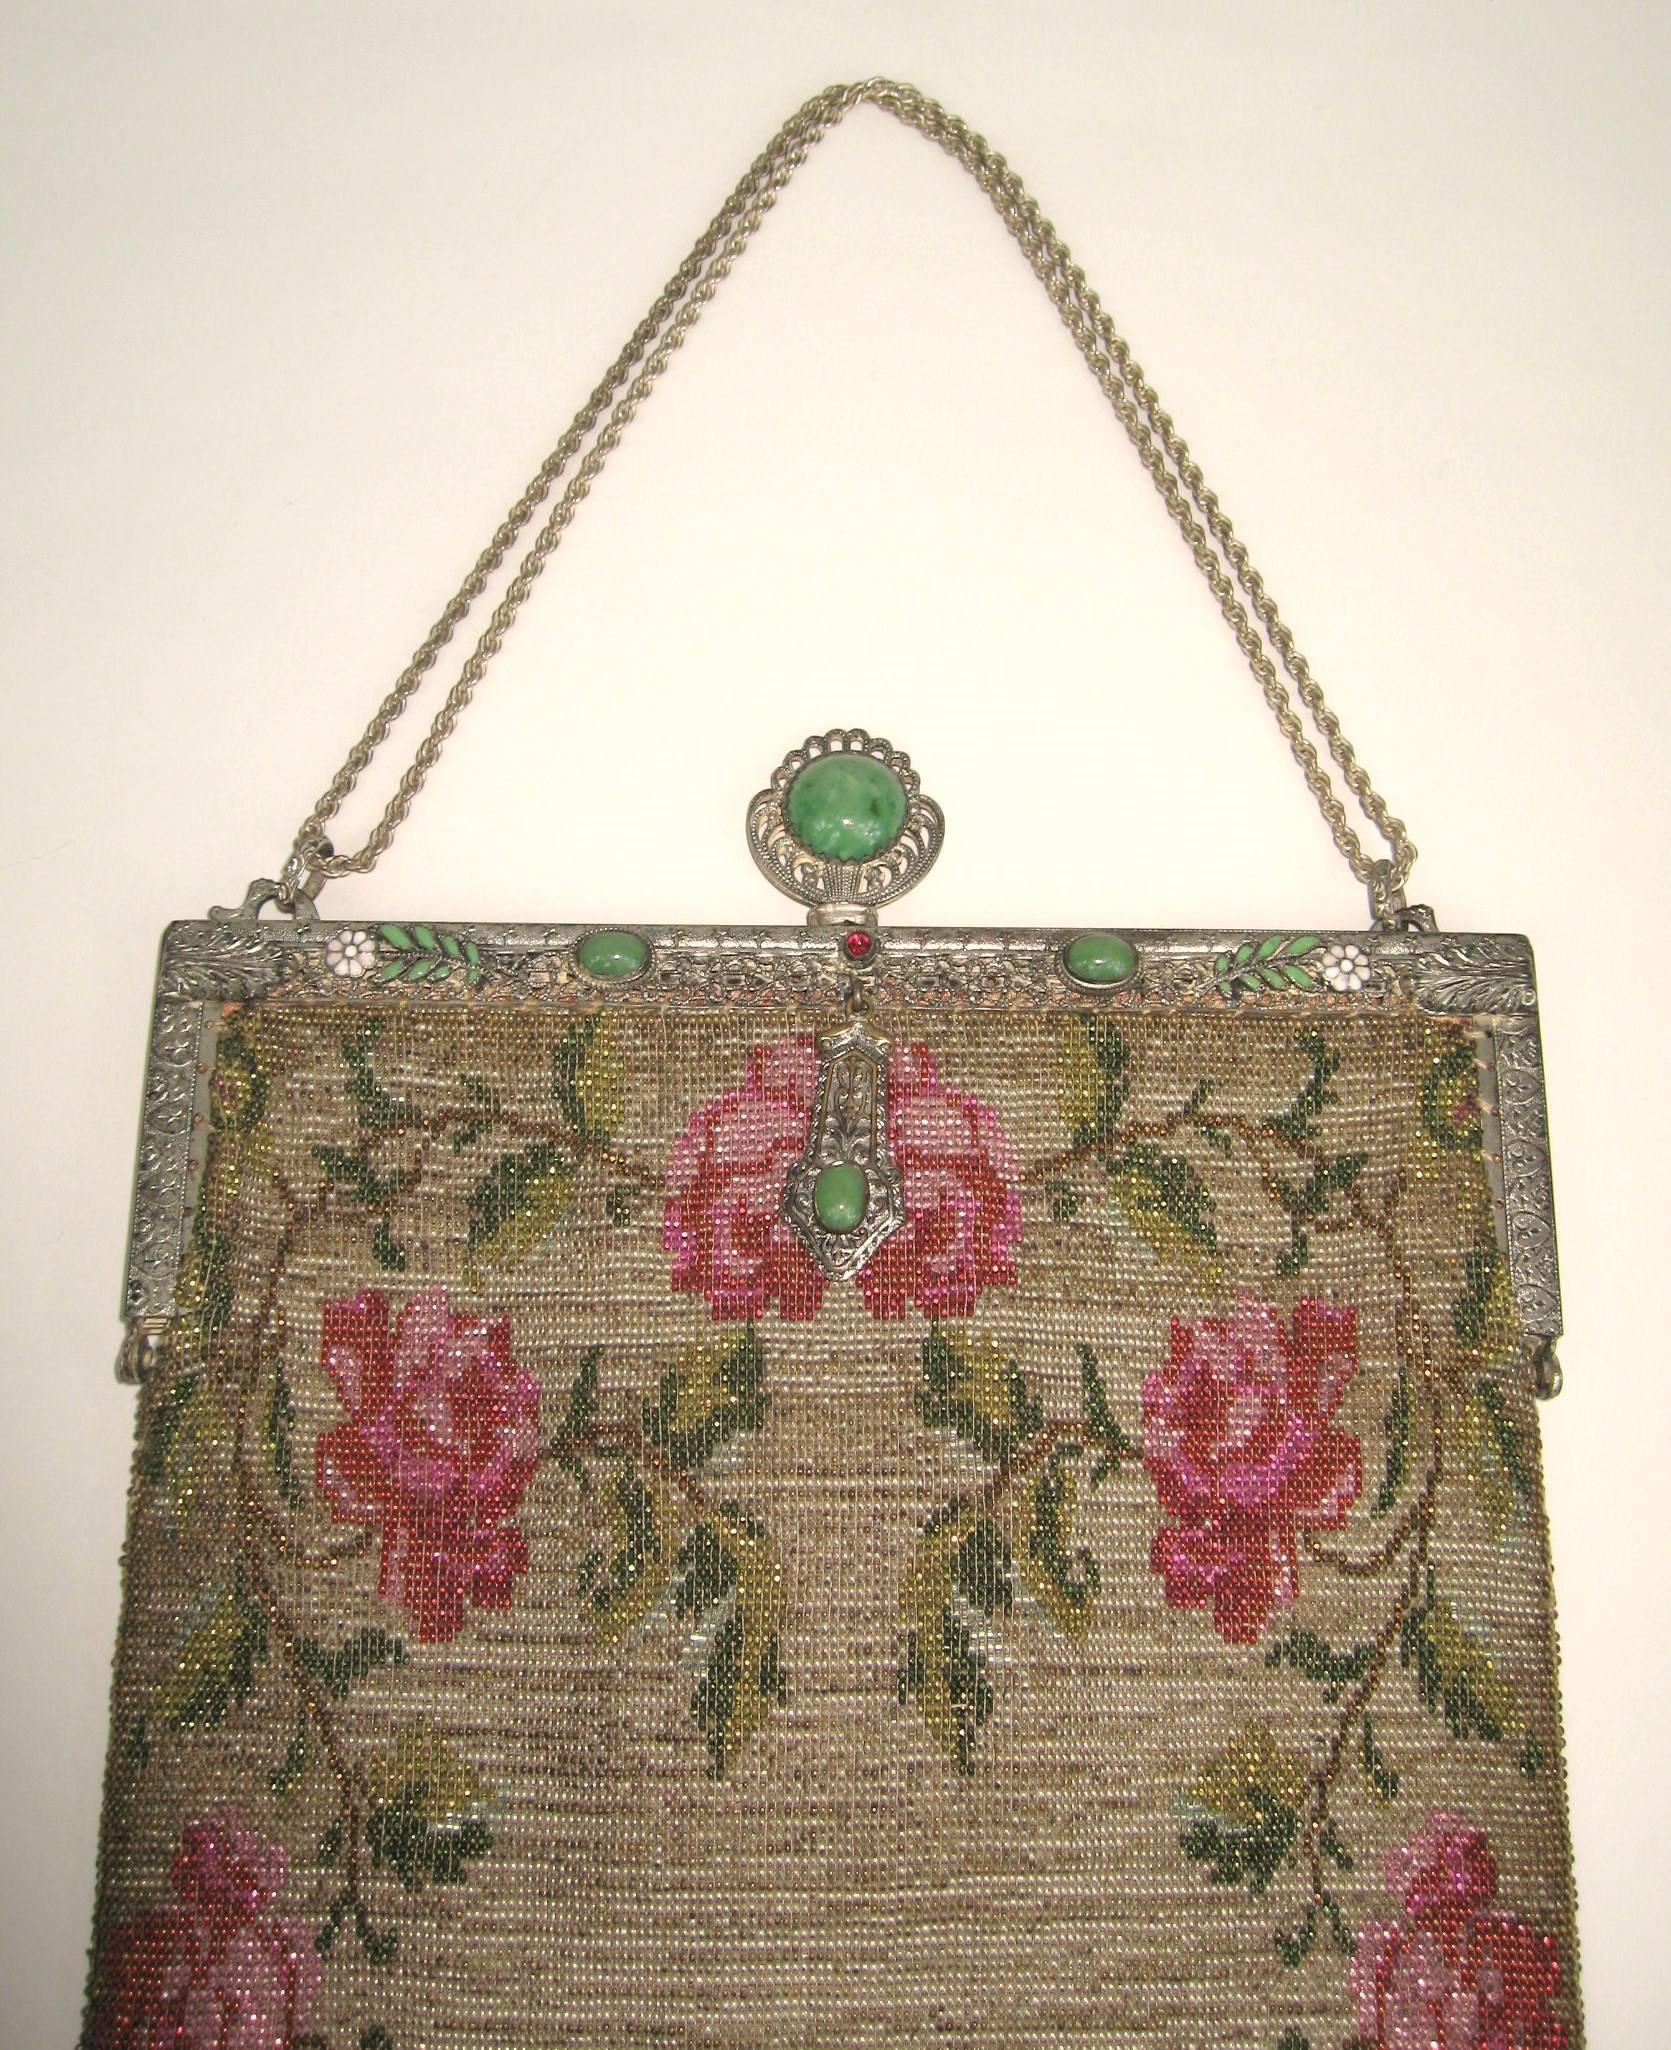 This is a amazing handbag, lined in silk. Most likely french.
Cabochons stones on the frame in Green 
Large clasp 
Fringe still in tact at the bottom
Comes with its original change purse and mirror
Measures 7-7/8